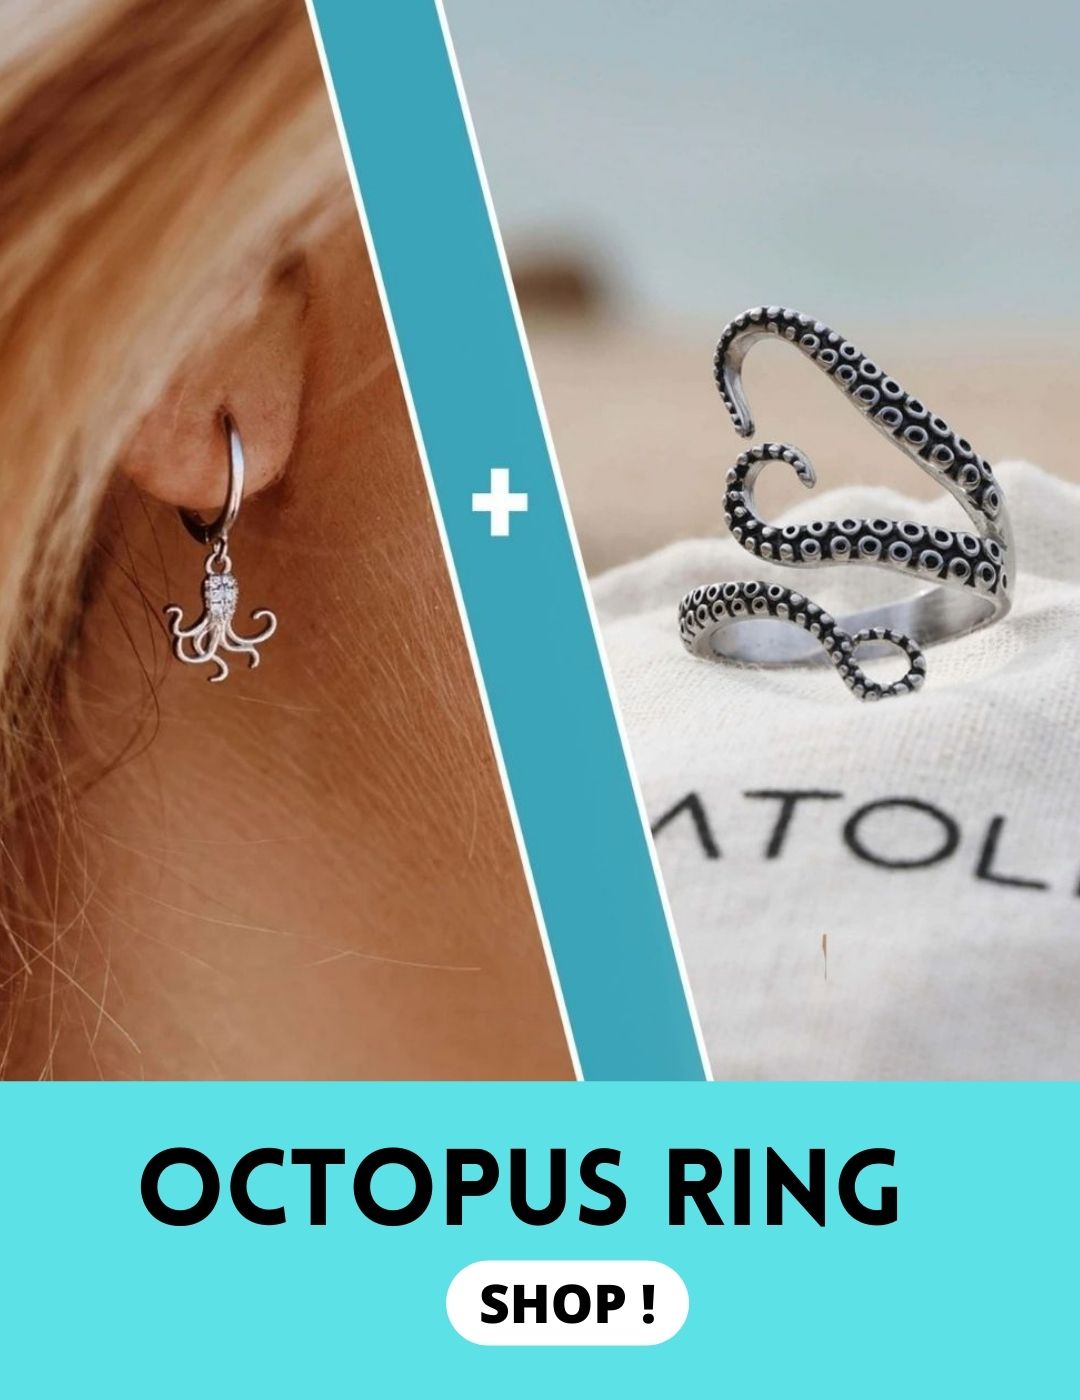 Fun things to know about octopus